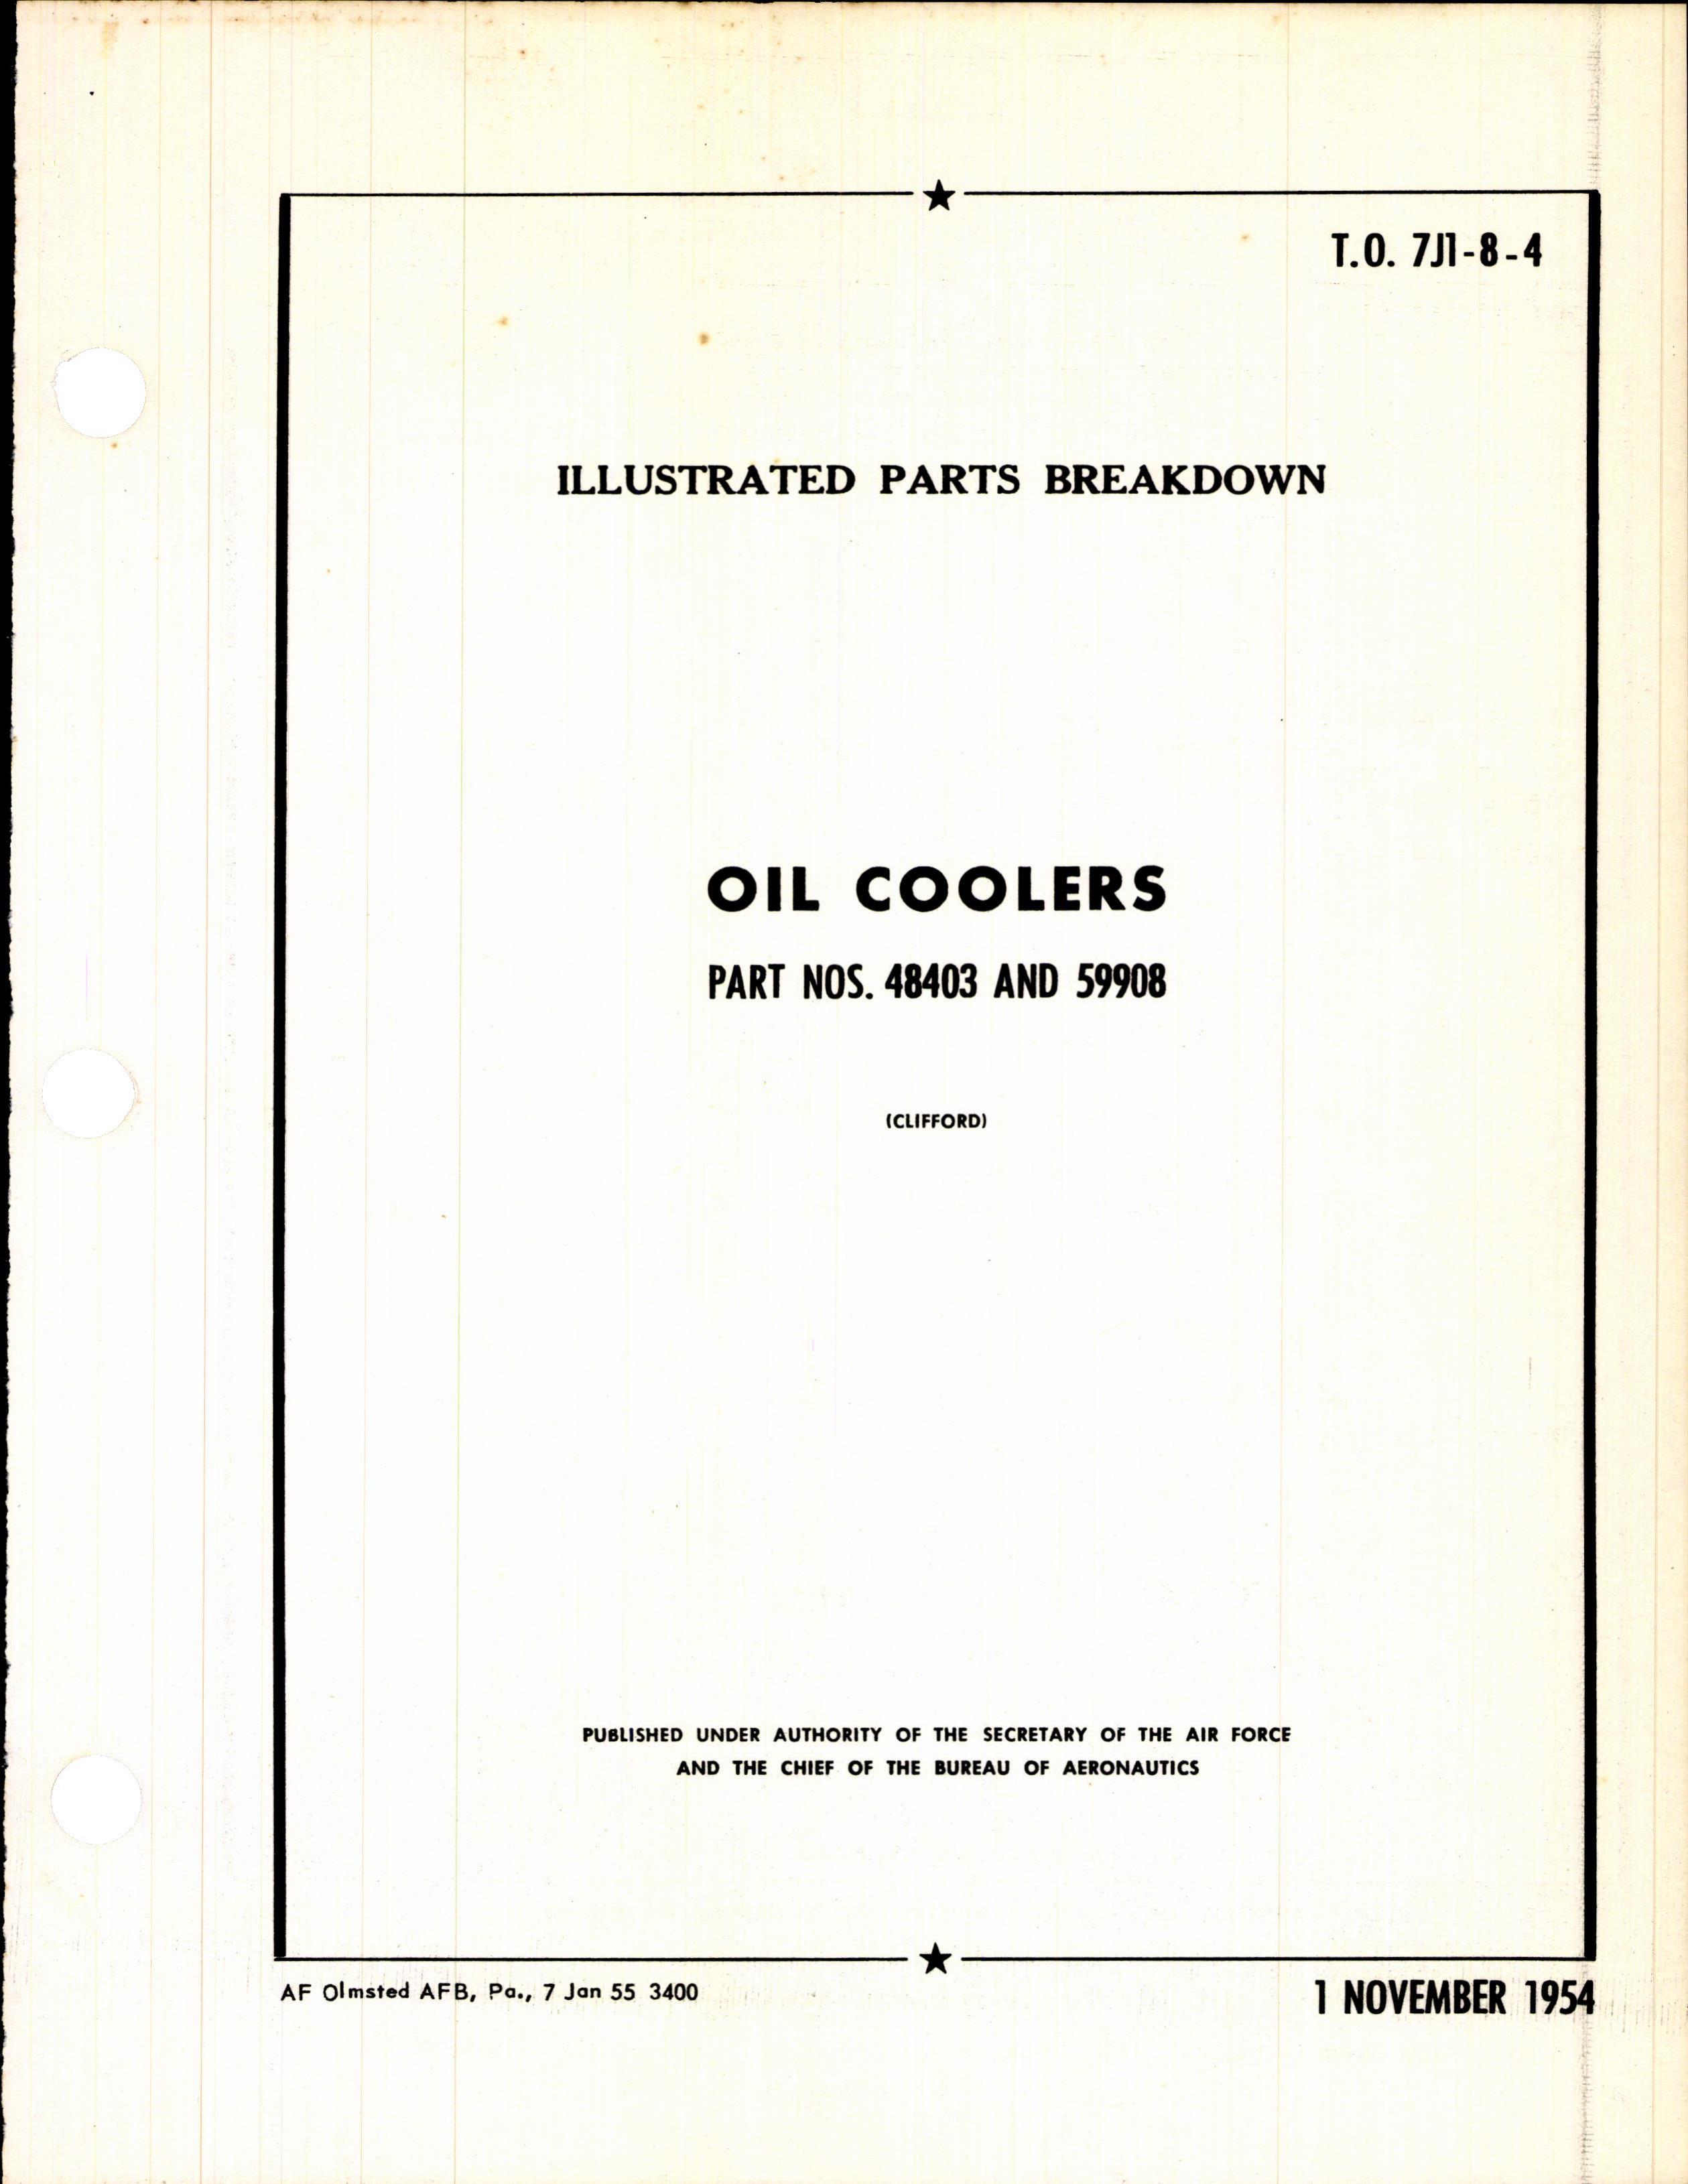 Sample page 1 from AirCorps Library document: Illustrated Parts Breakdown for Oil Coolers